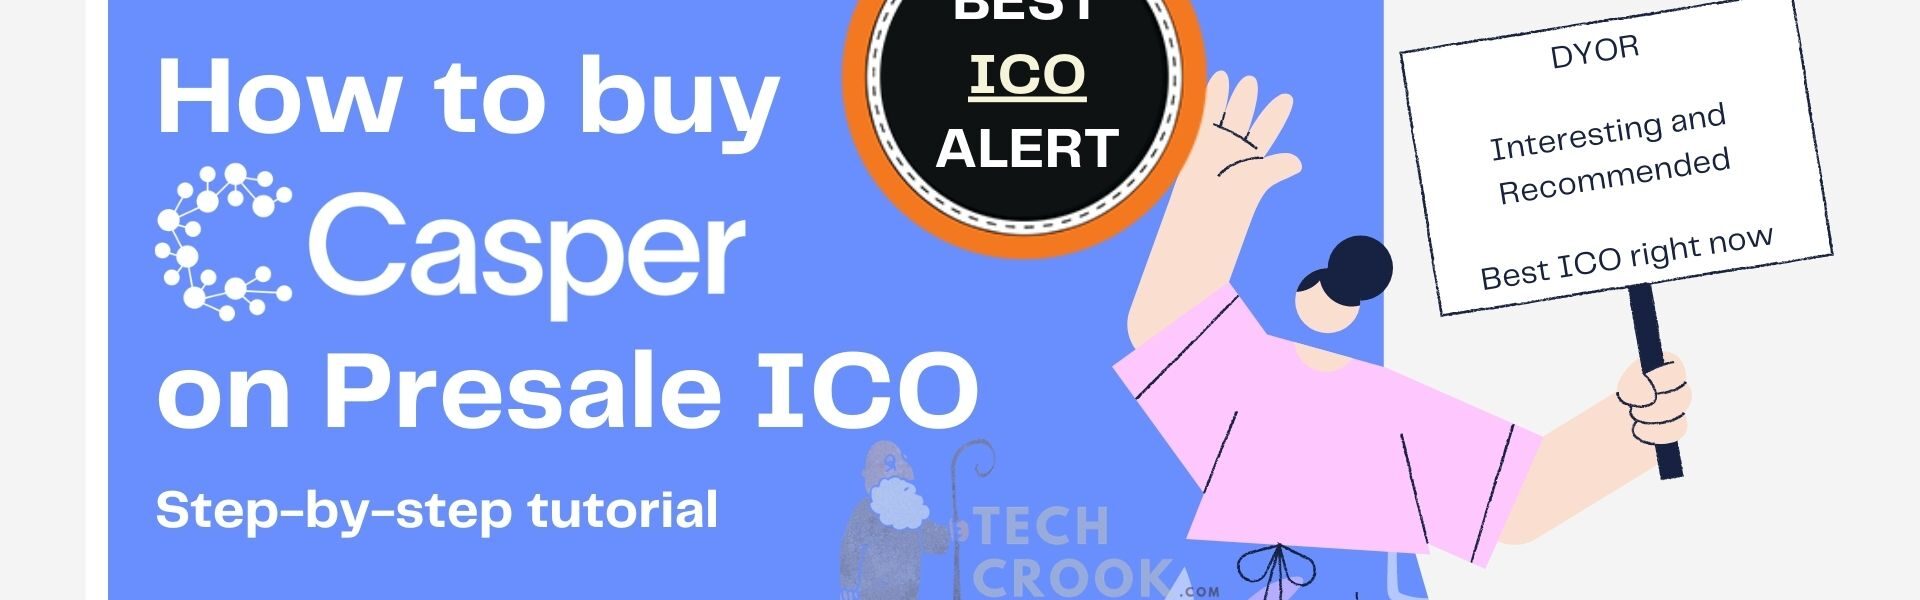 Casper token ICO how and where to buy CSPR tokens Coinlist